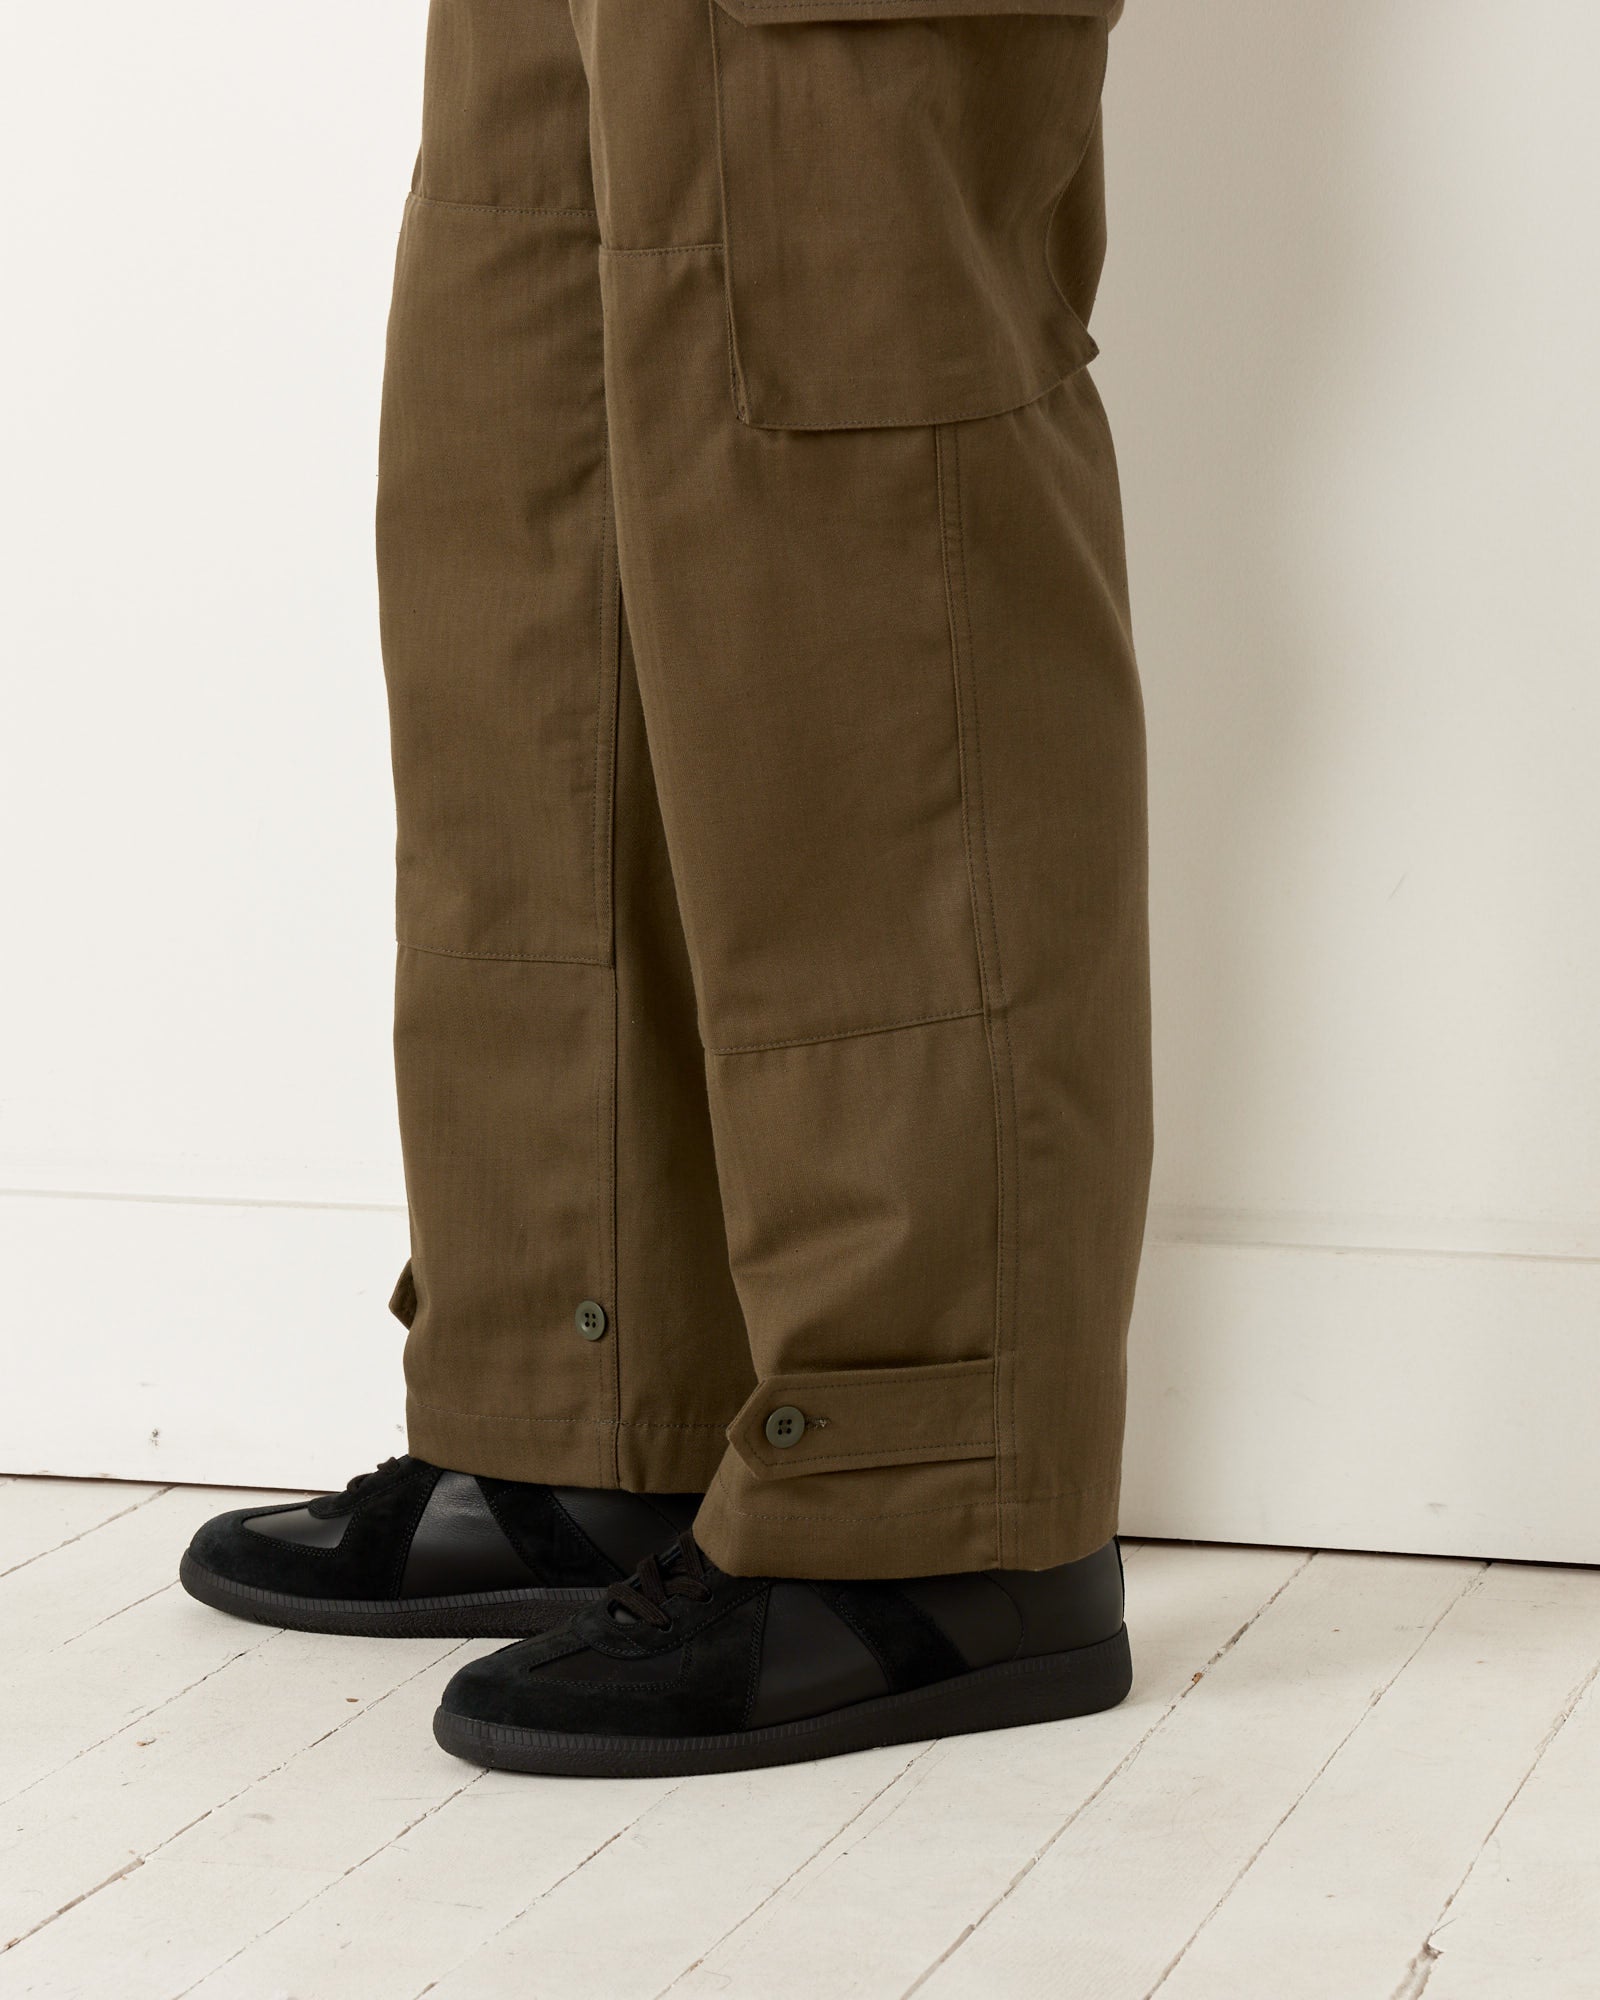 Pant in Olive